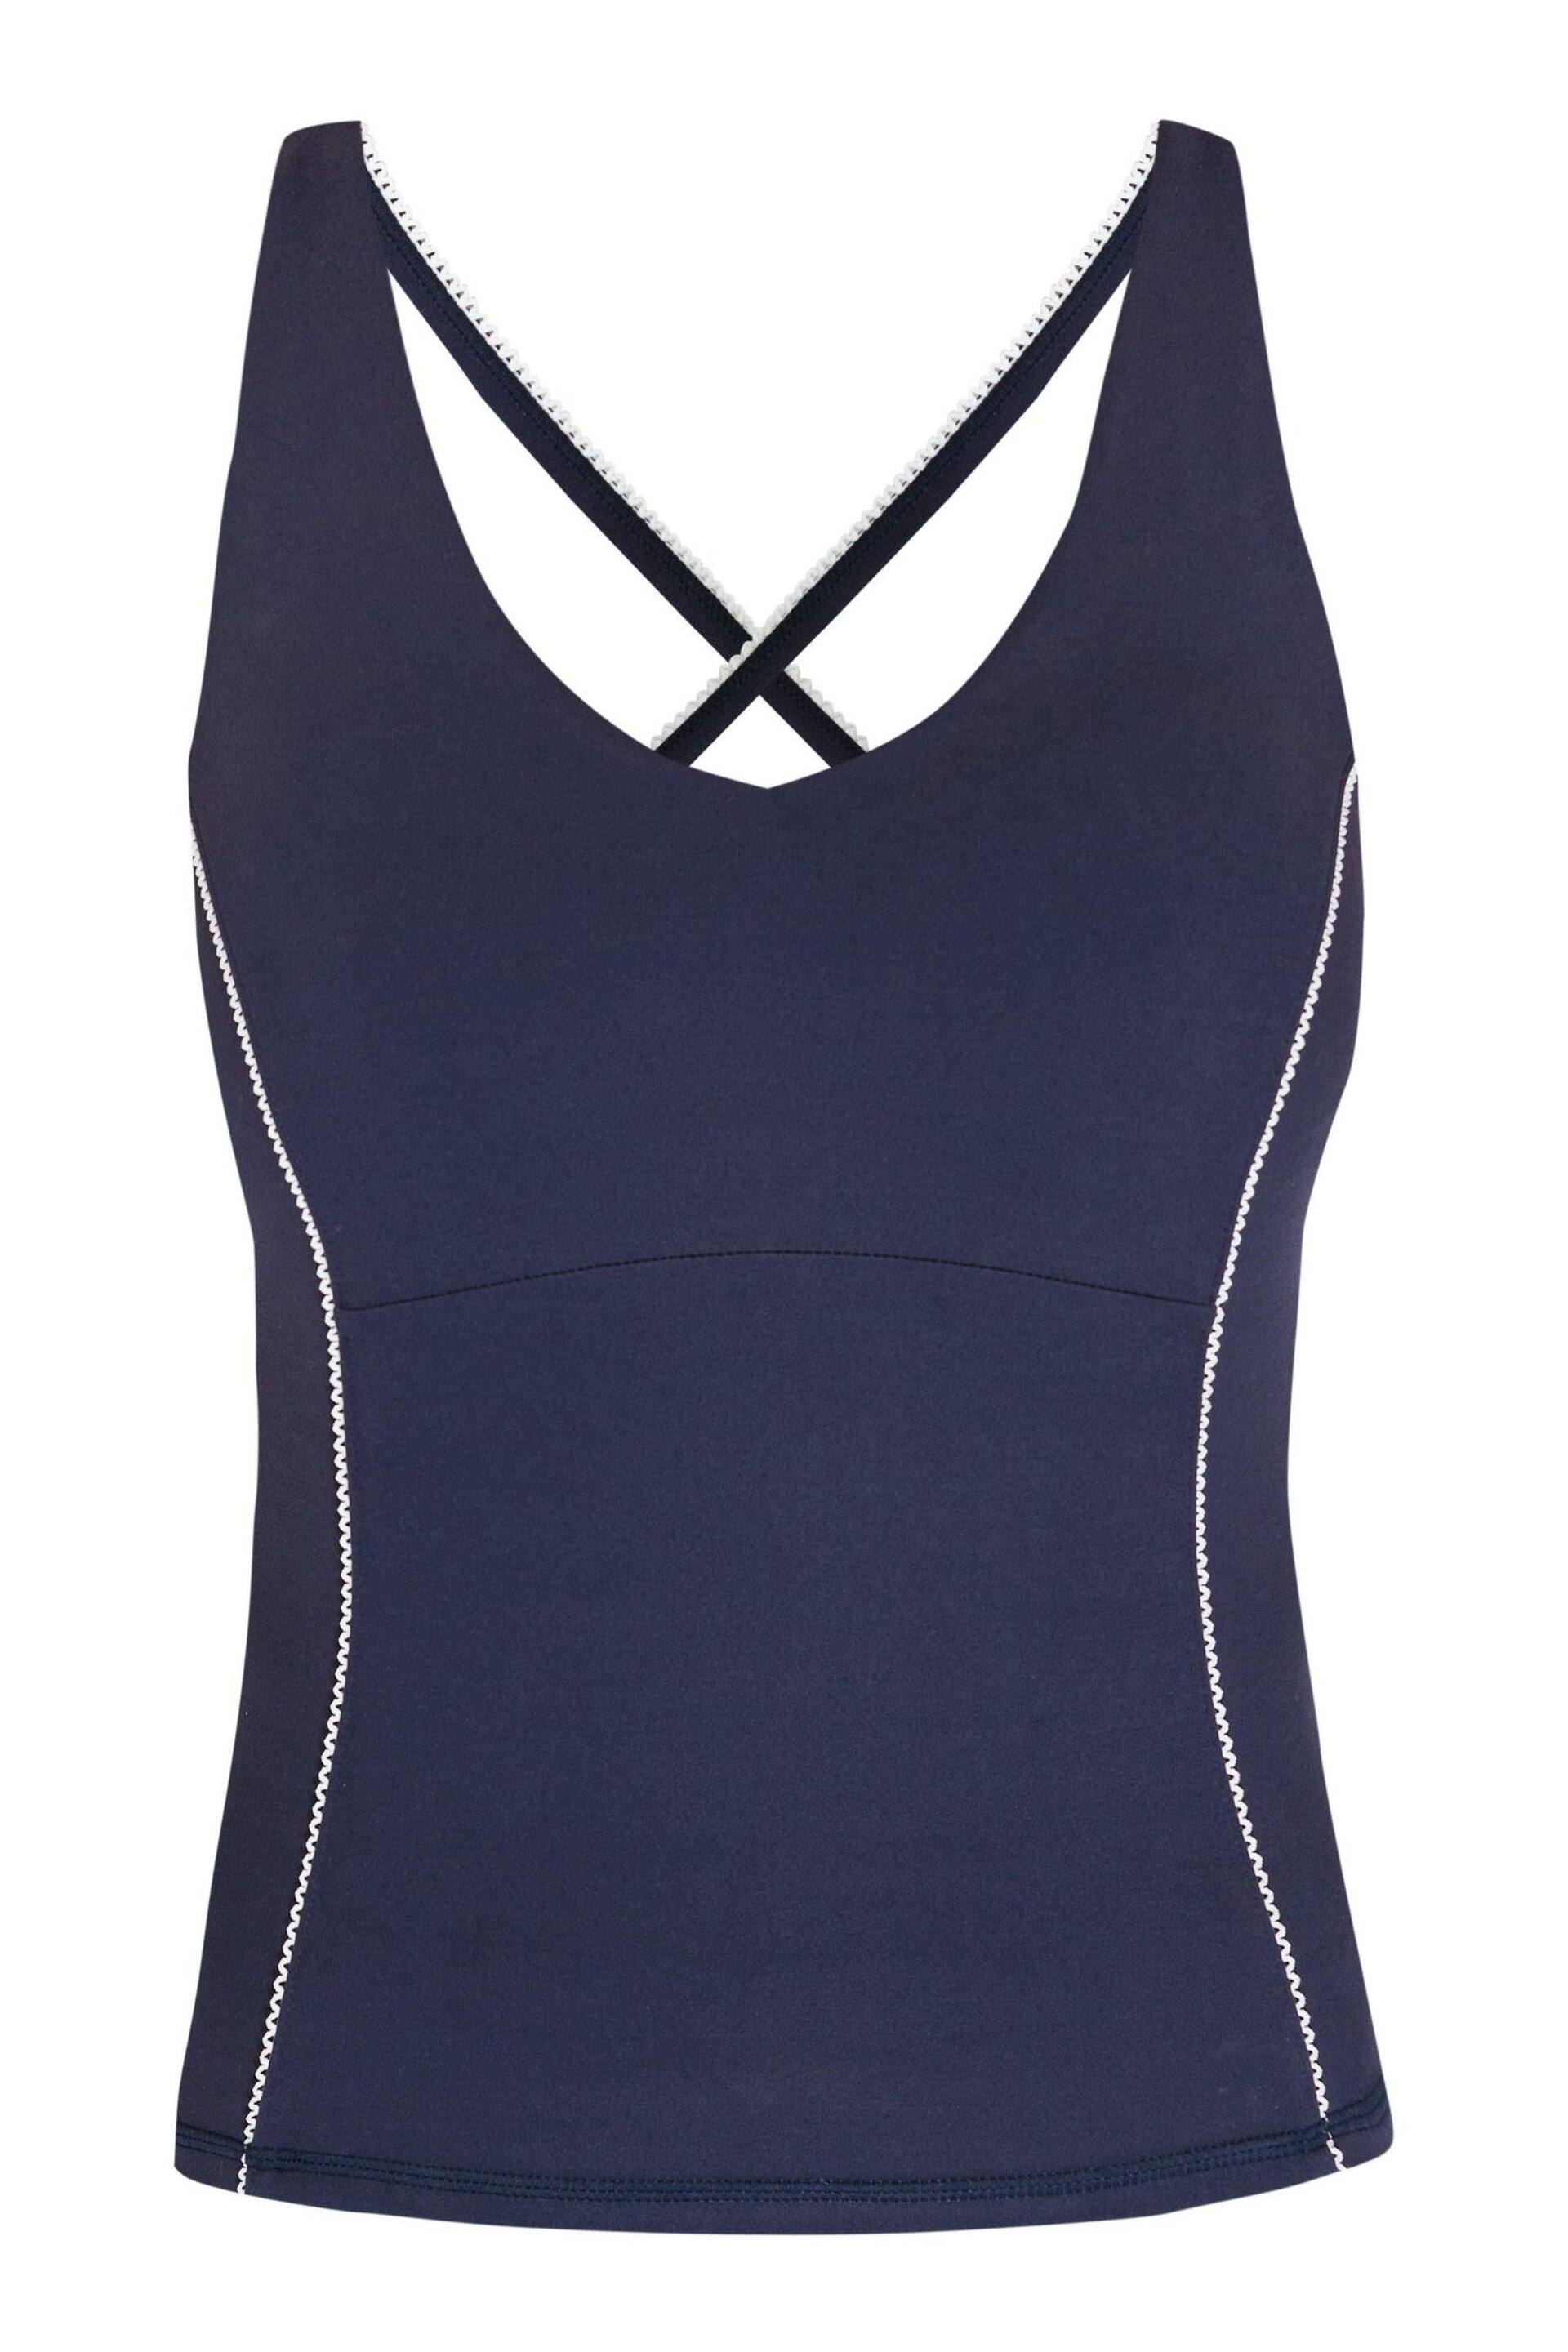 Sweaty Betty Navy Blue Supersoft Picot Lace Strappy Bra Tank Top - Image 7 of 7